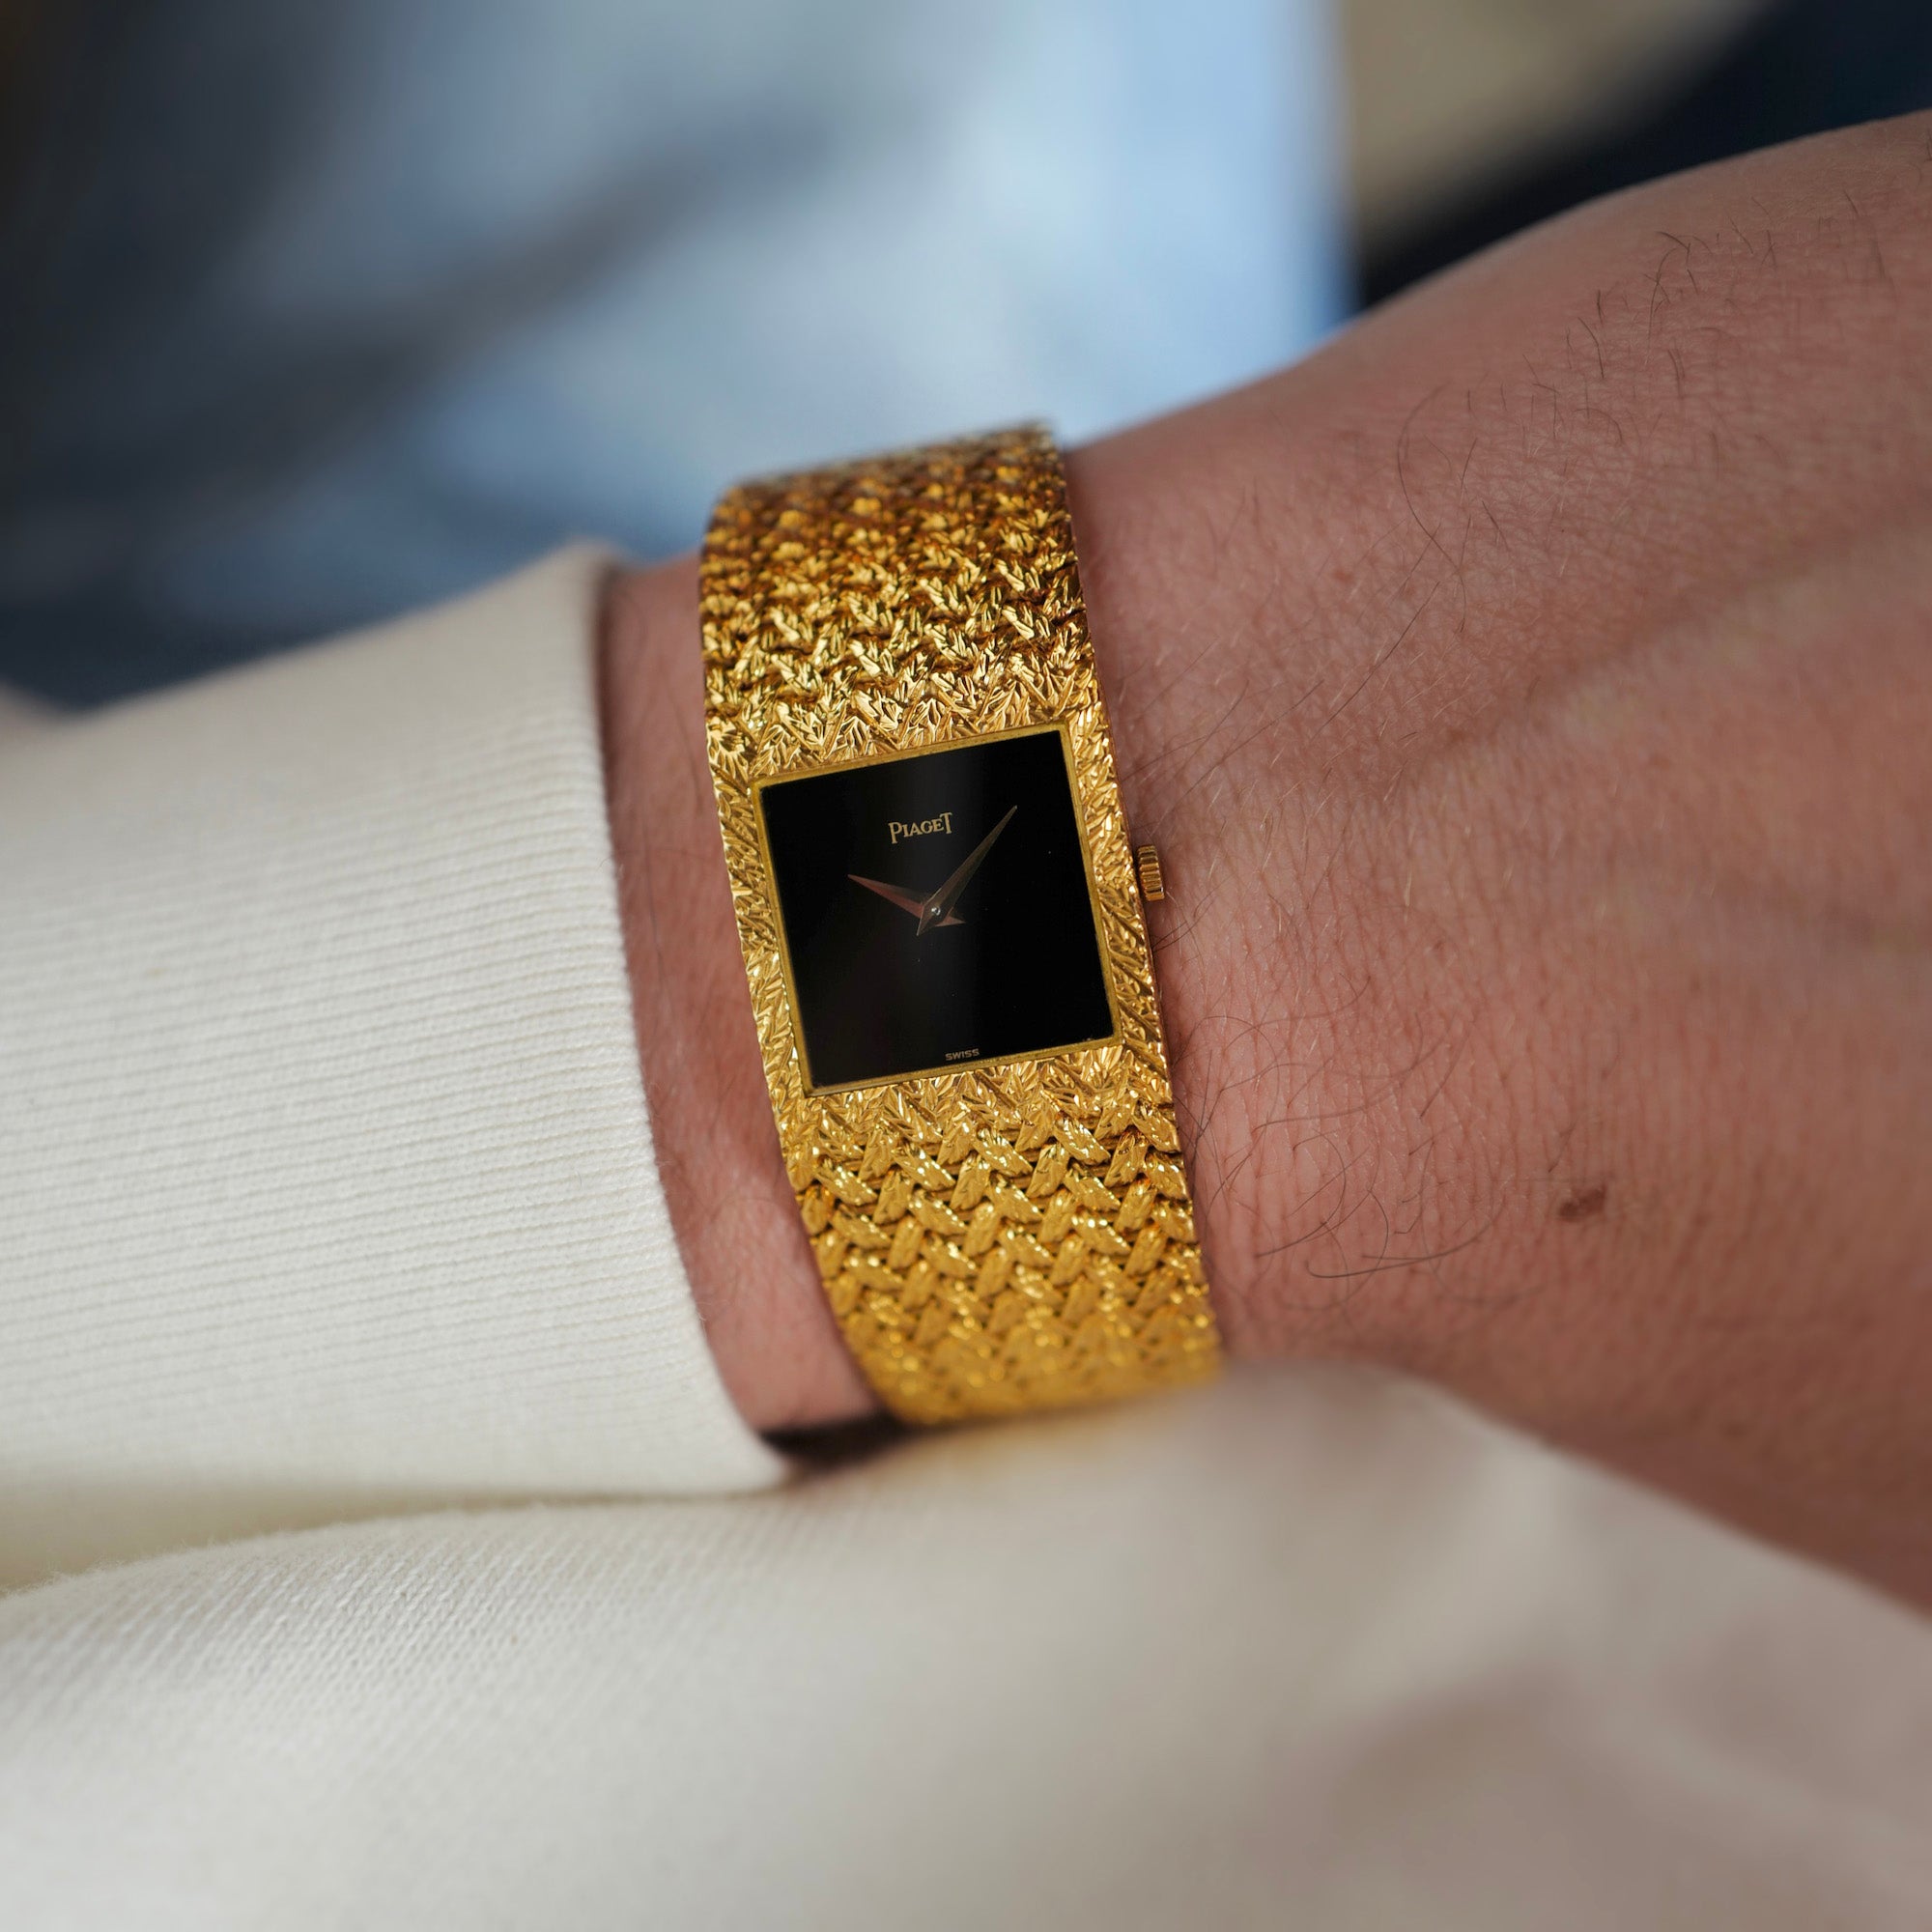 Piaget - Piaget Yellow Gold Tradition with Onyx Dial Ref. 9352 - The Keystone Watches